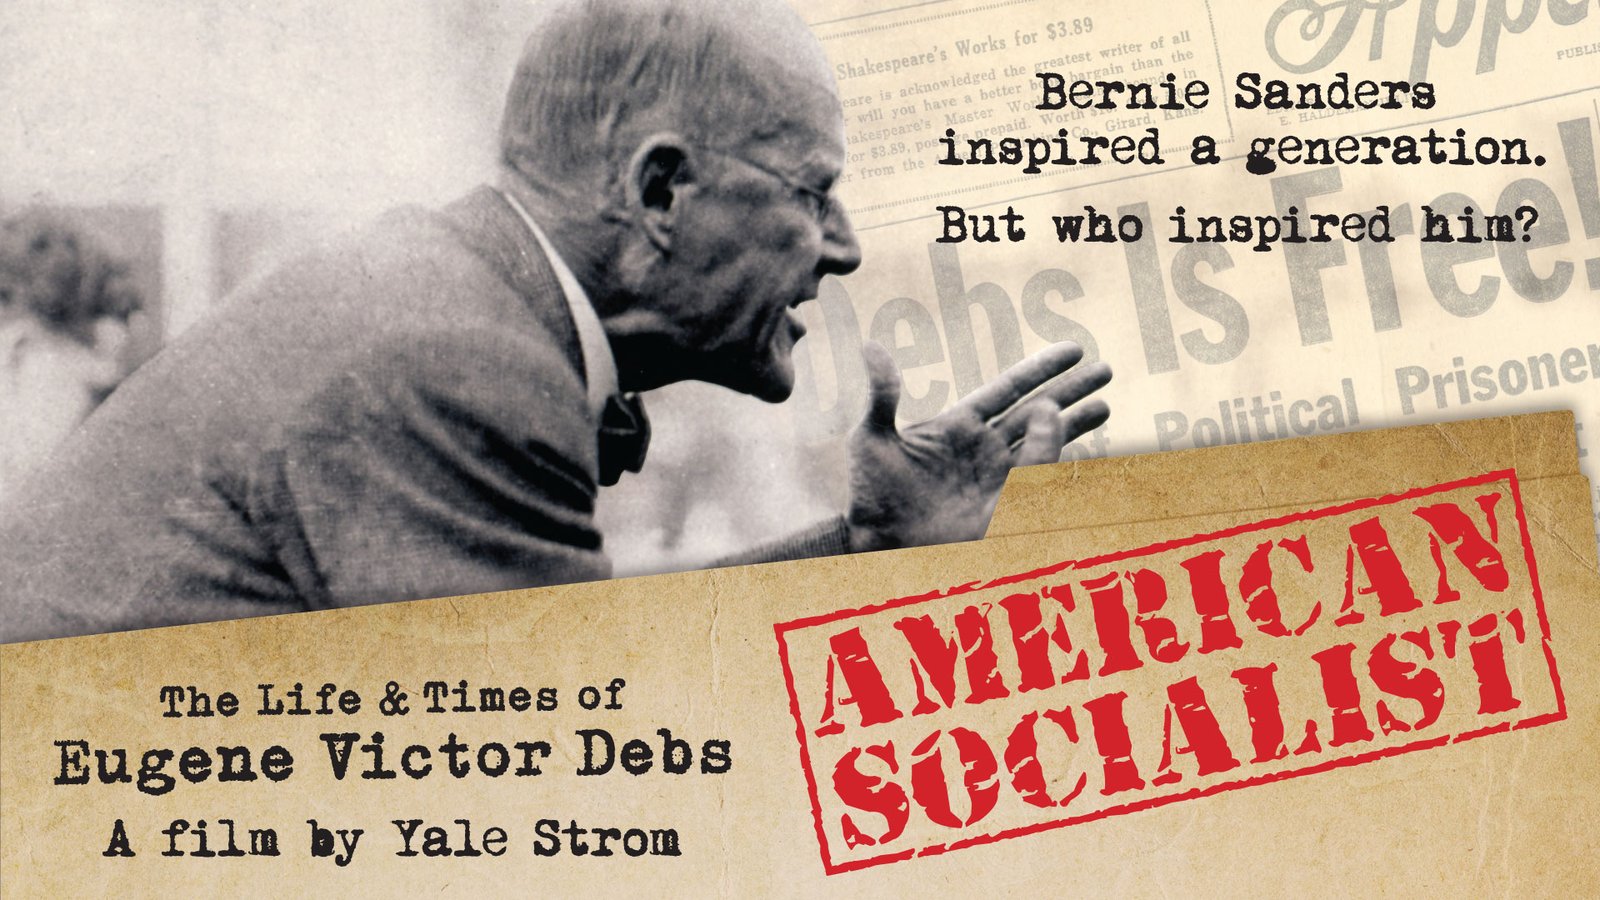 American Socialist - The Life and Times of Eugene Victor Debs